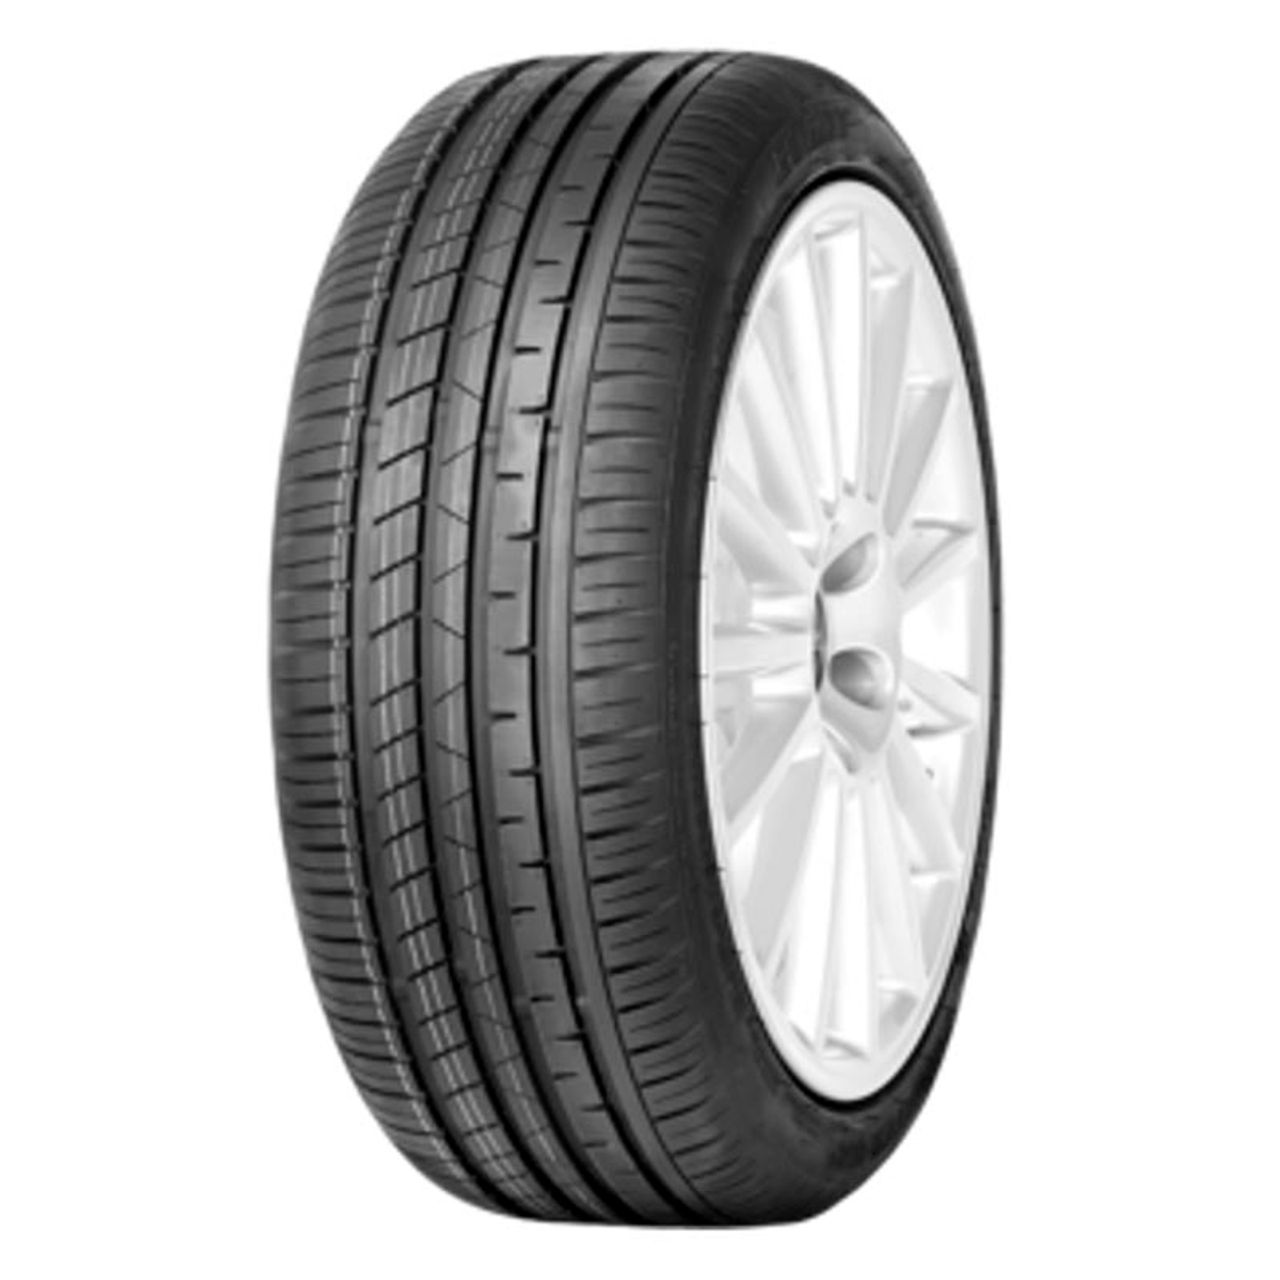 EVENT POTENTEM UHP 235/45R17 97W BSW